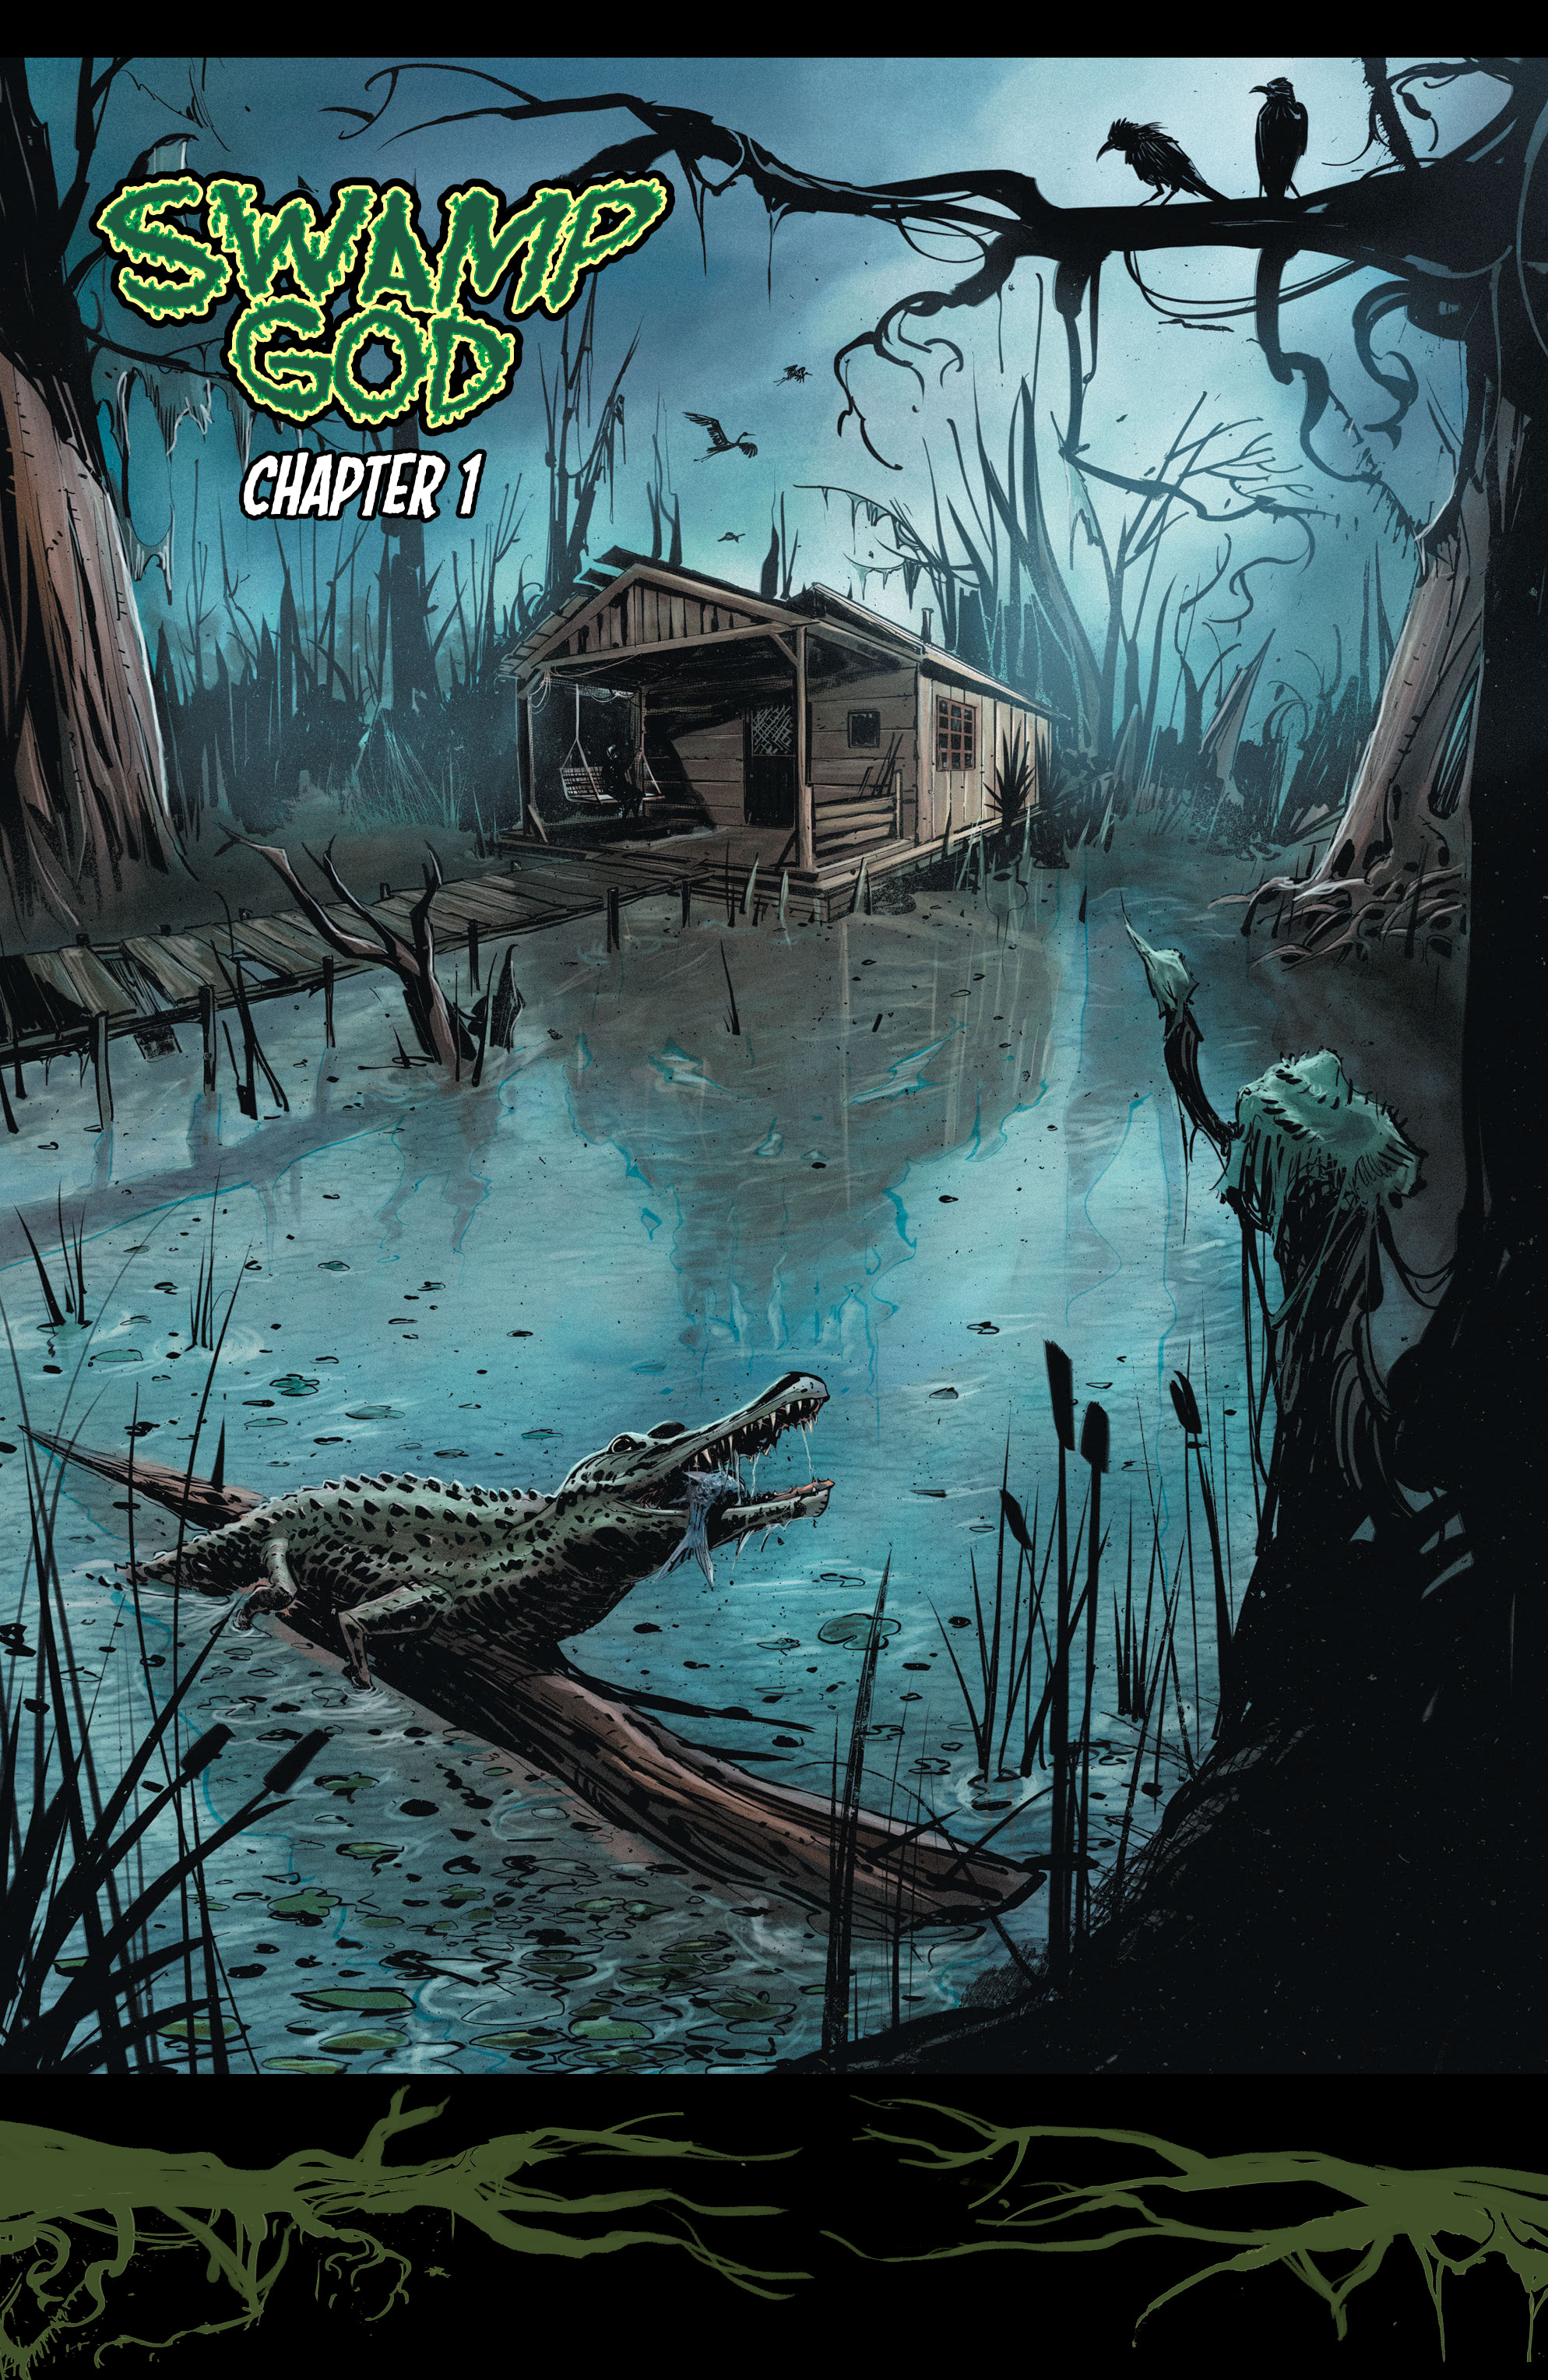 Read online Swamp God comic -  Issue #1 - 3